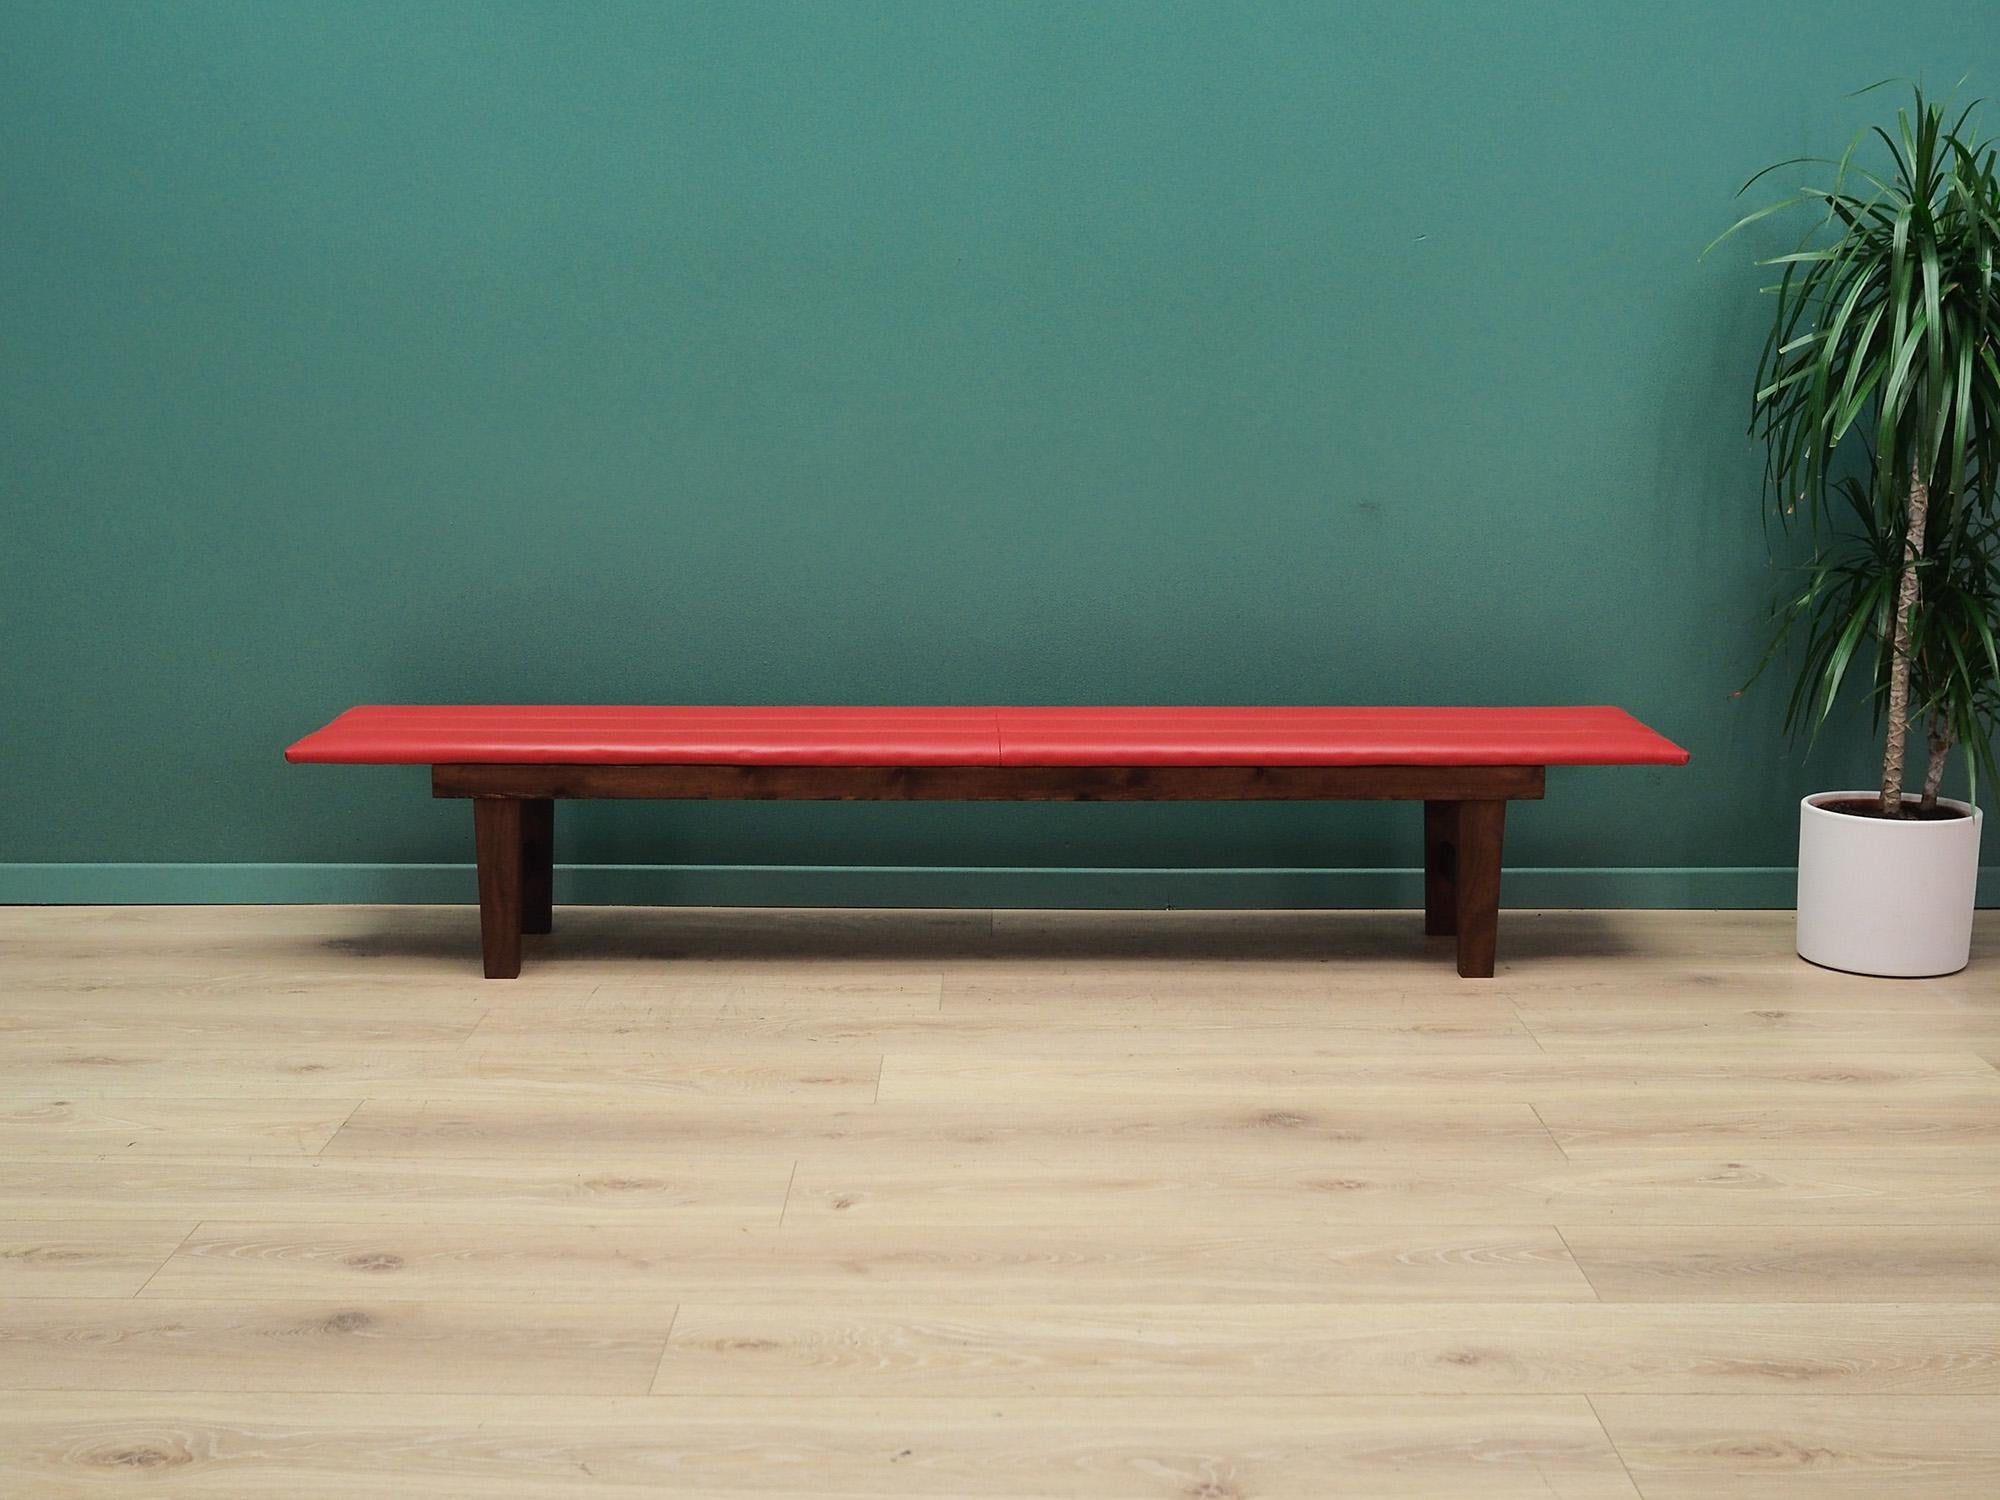 Bench made in the 1990s, Danish production.

The construction is made of teak wood. The seat is preserved in its original condition. Uupholstery is made of high quality eco leather in red. The ideal equipment for every waiting room in retro